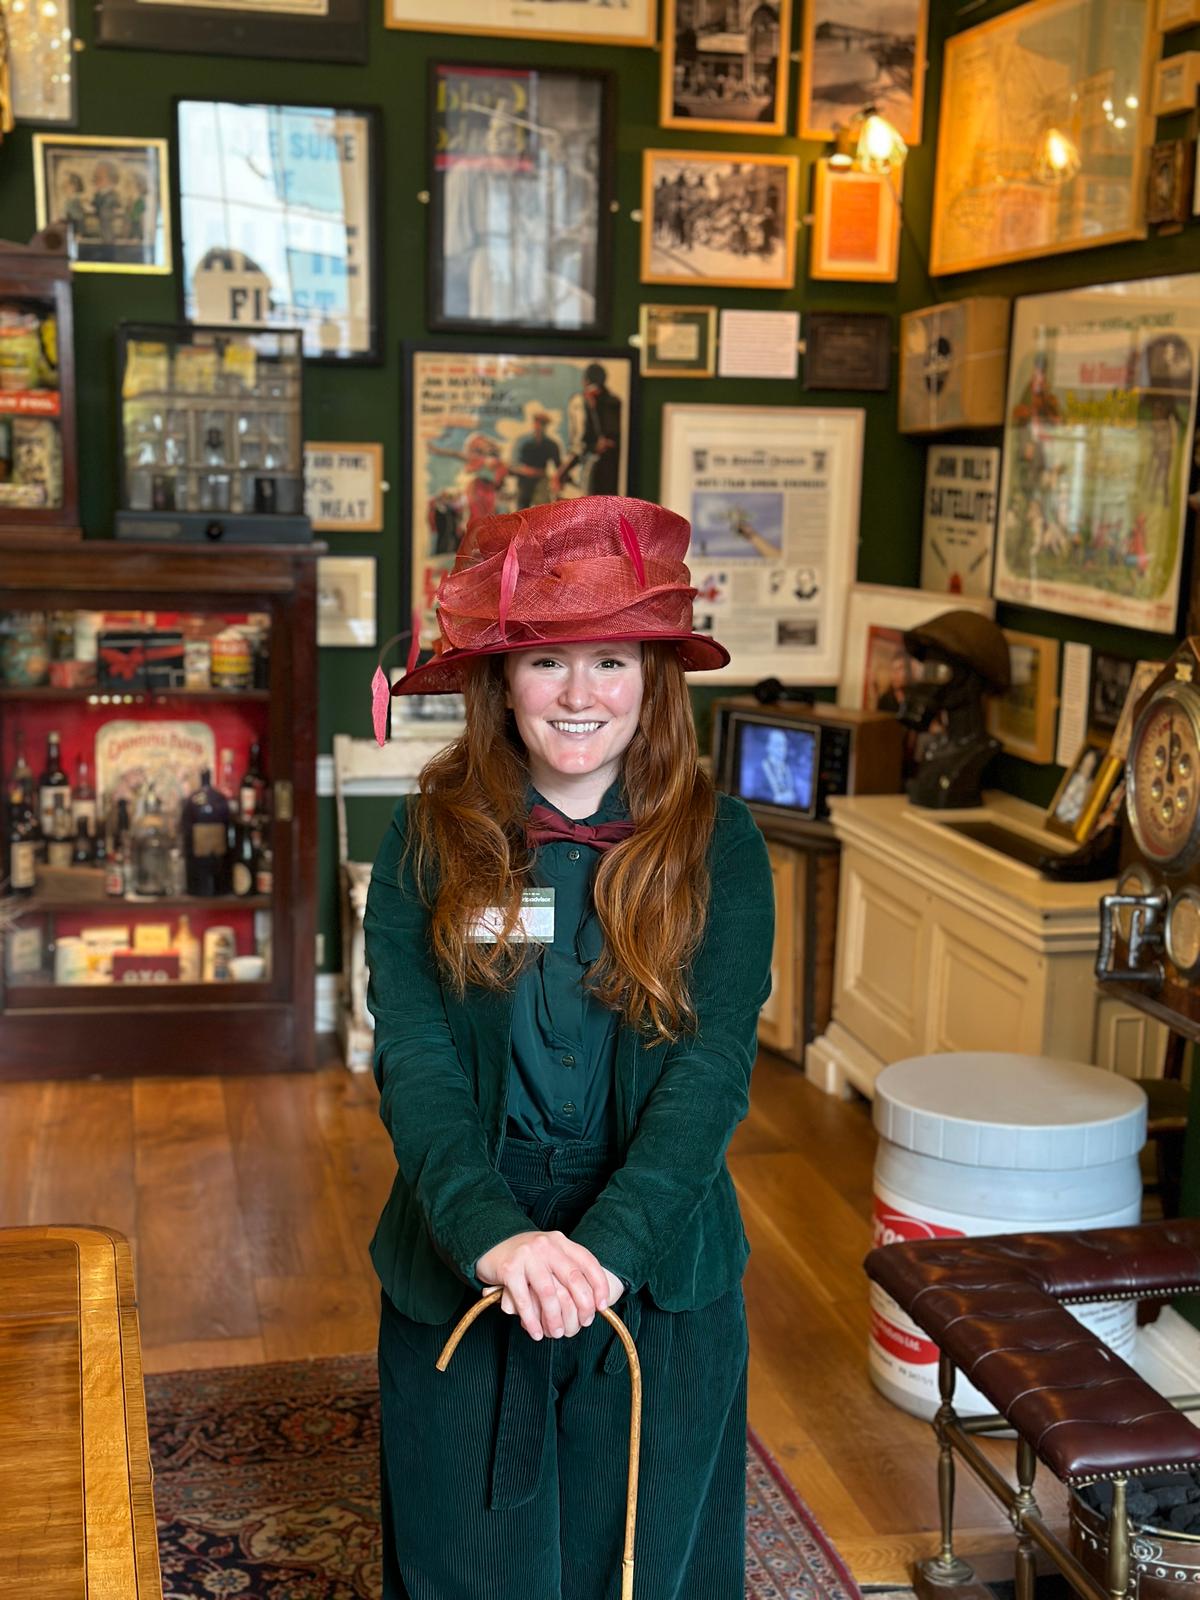 Lisa, the informative guide at The Little Museum of Dublin, gives a very informative tour covering the extent of Ireland's history. (Tim Johnson)